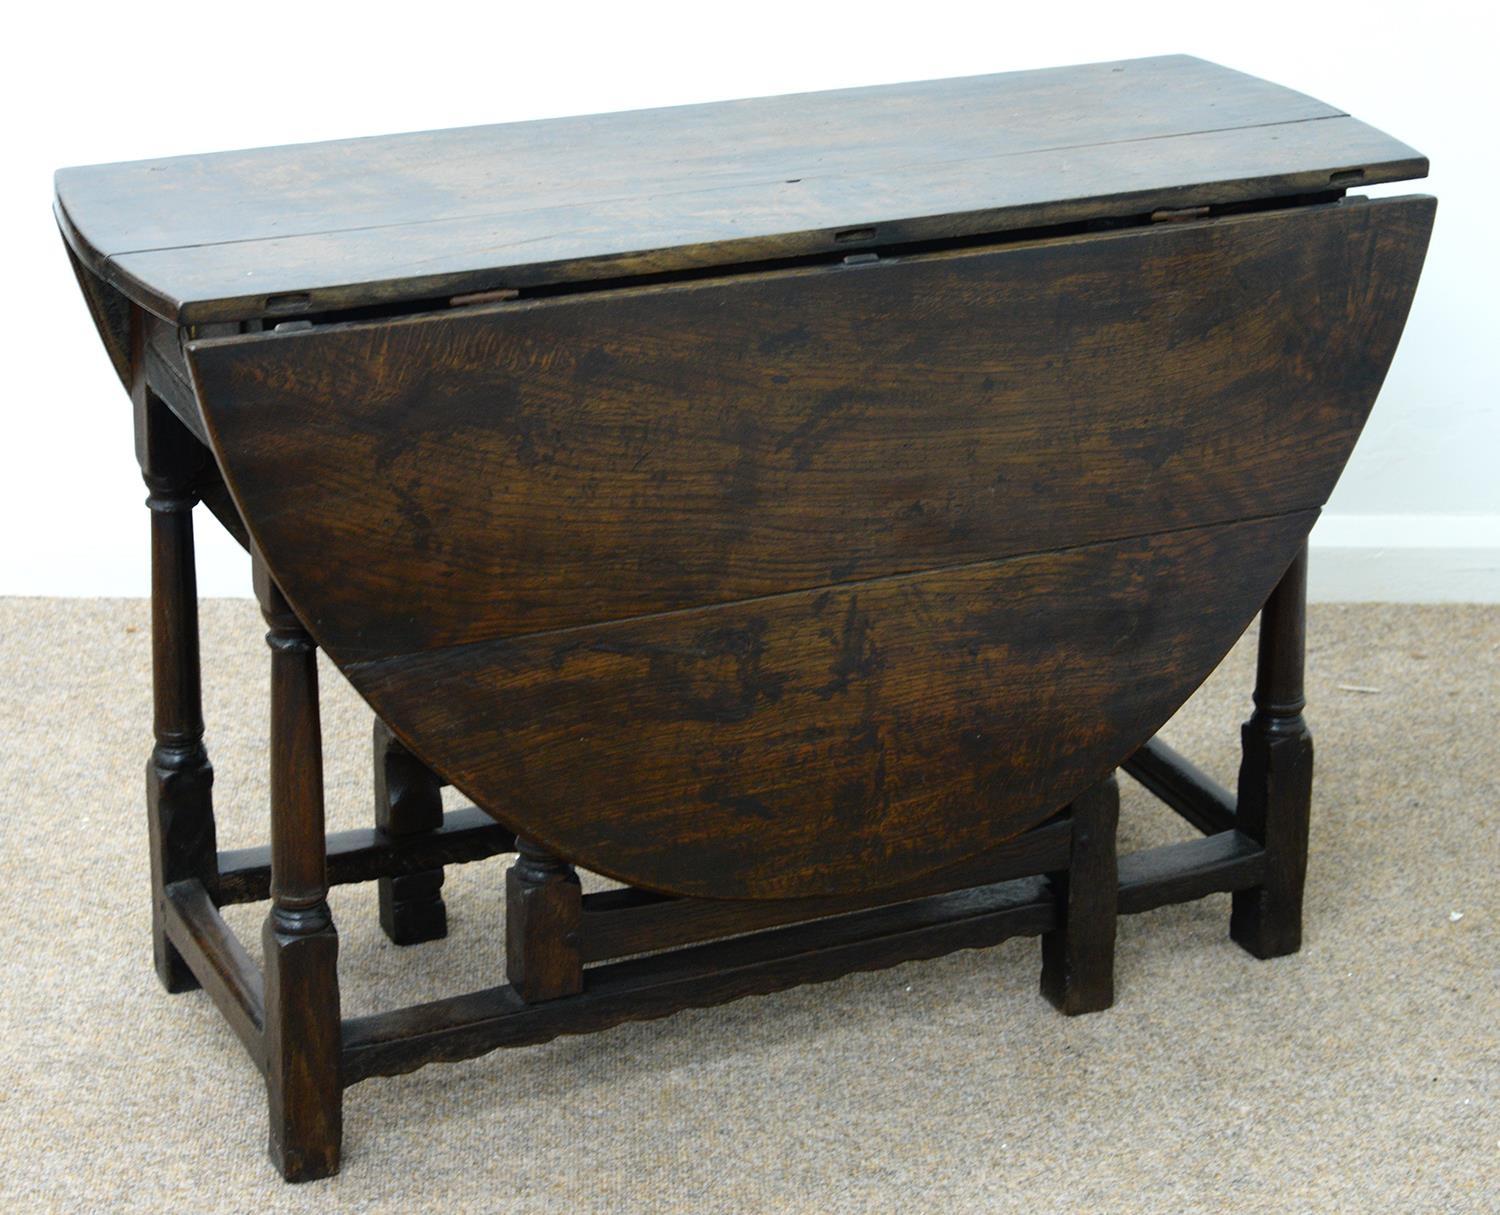 AN OAK GATELEG TABLE, SECOND HALF 18TH C, FITTED WITH A DRAWER, ON TAPERING TURNED LEGS UNITED BY